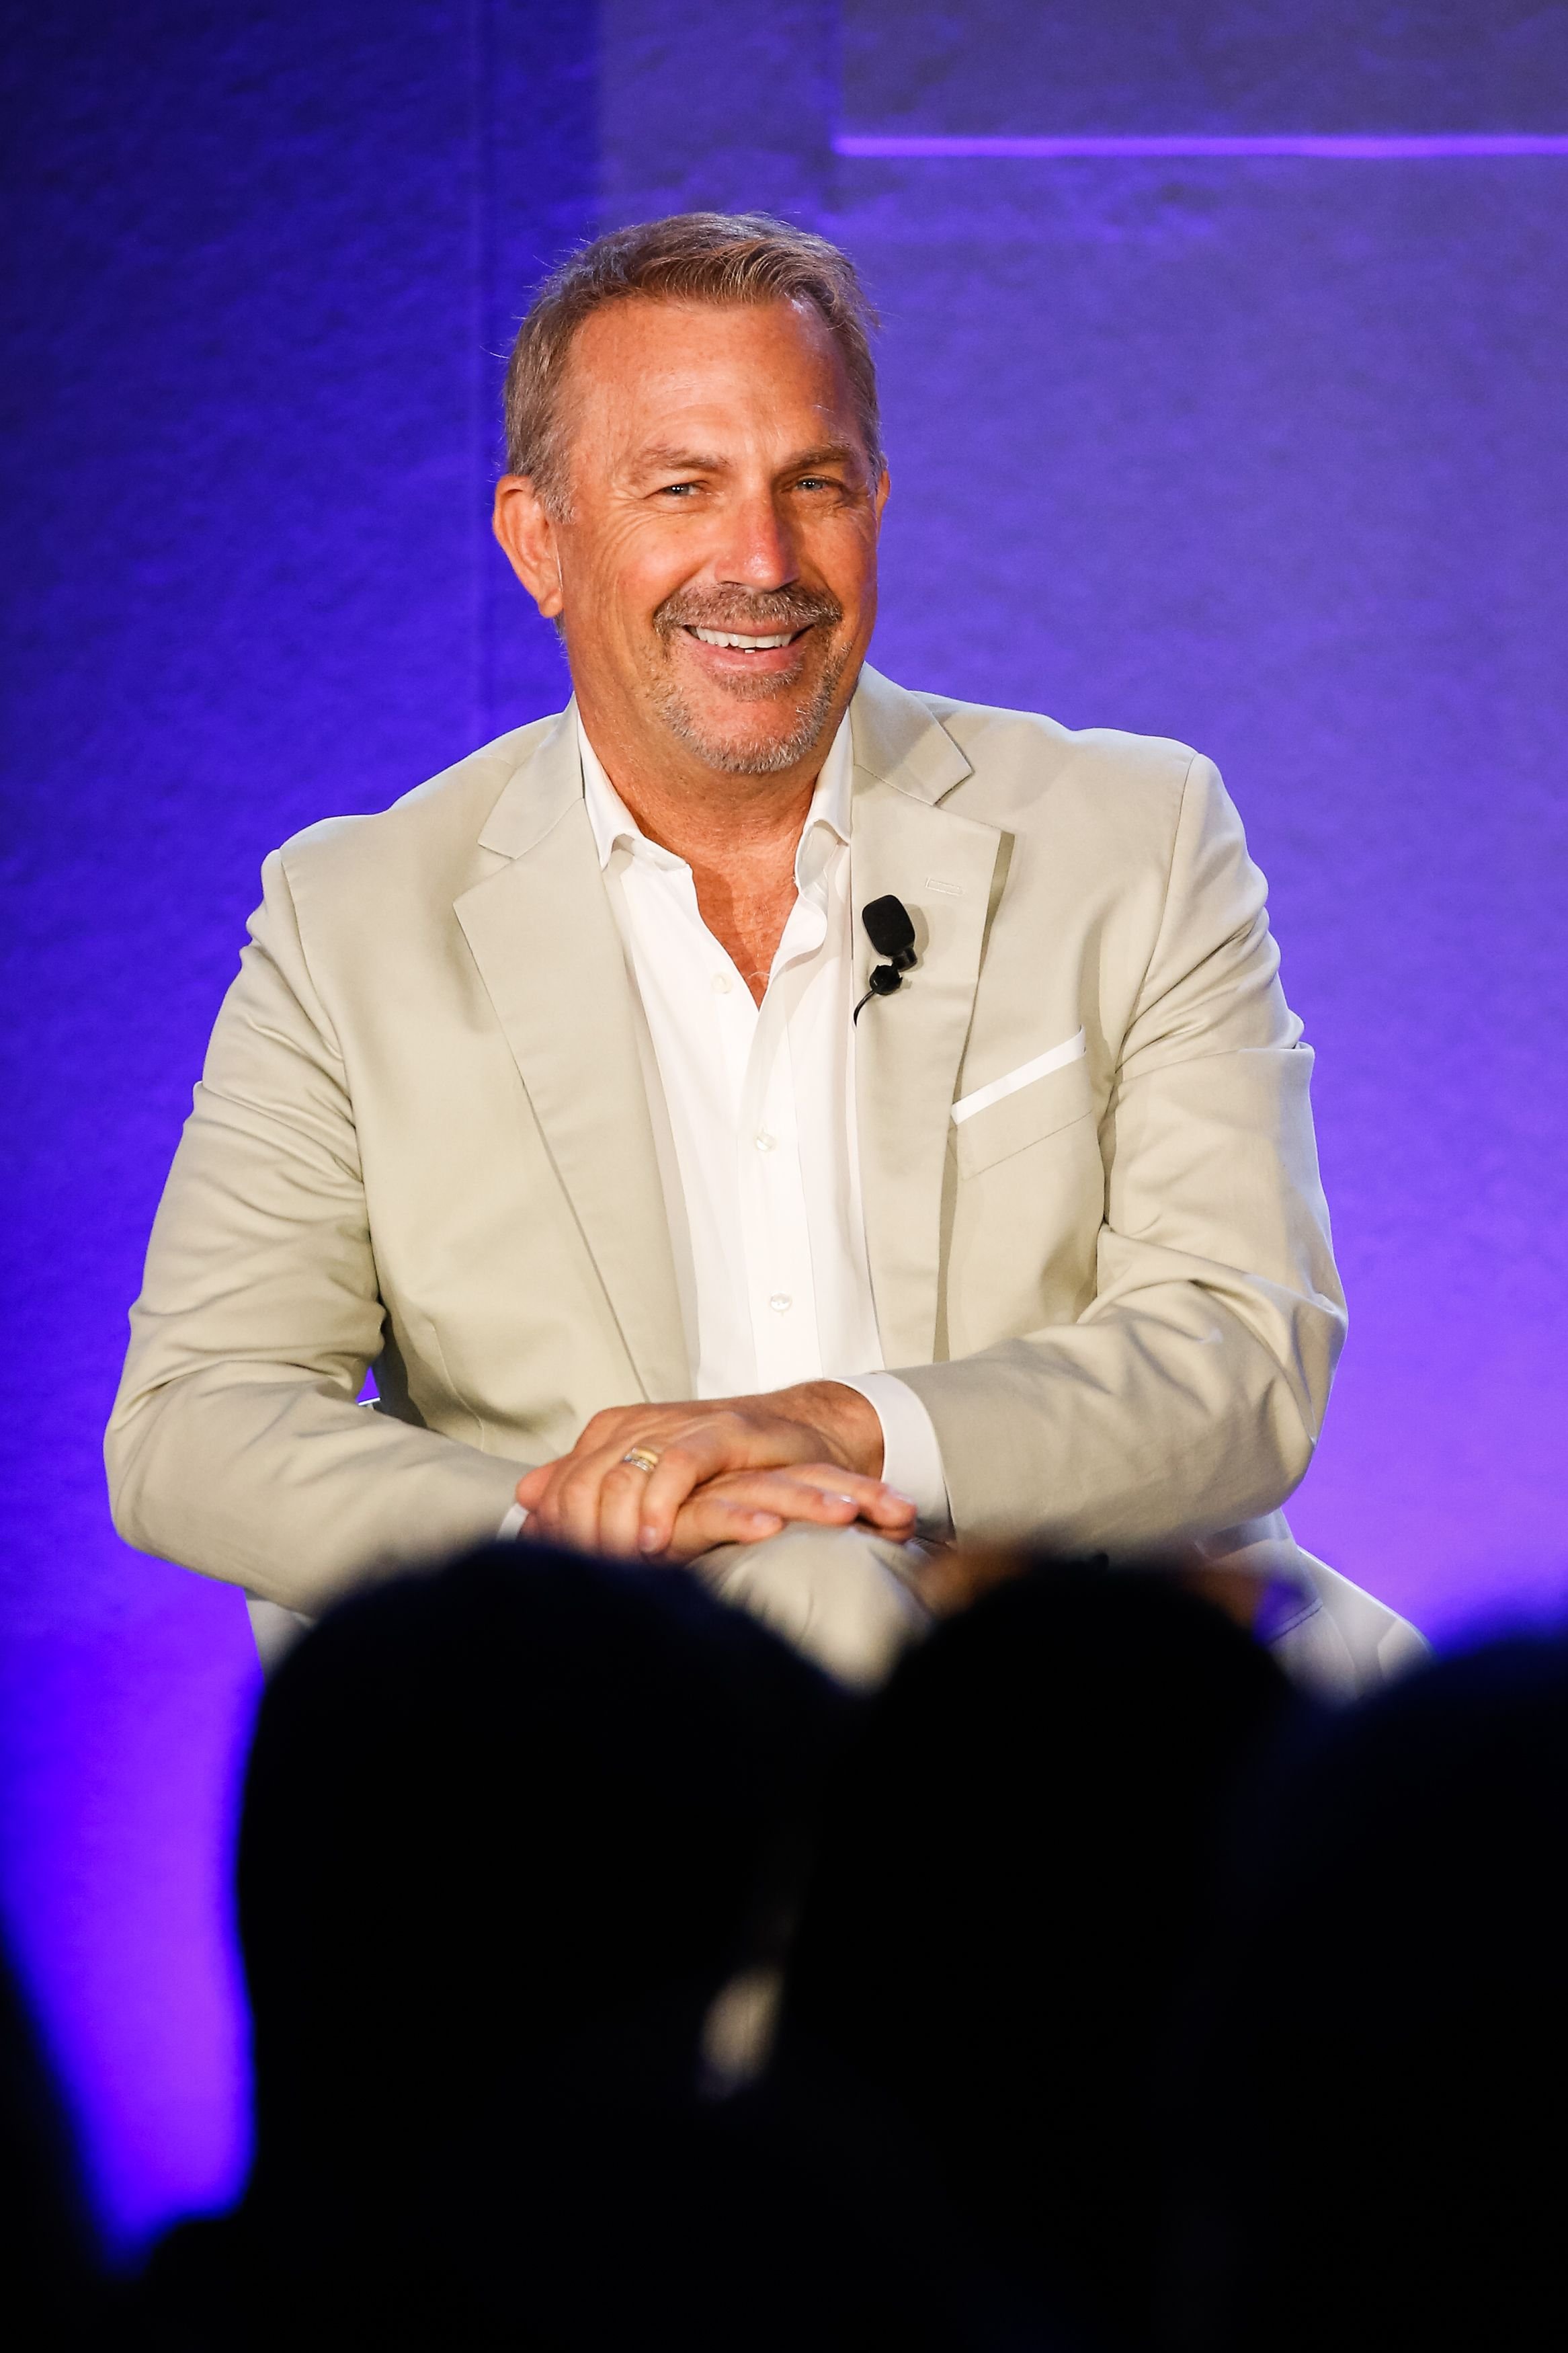 Kevin Costner during the Cannes Lions Festival 2018 on June 21, 2018. | Photo: Getty Images